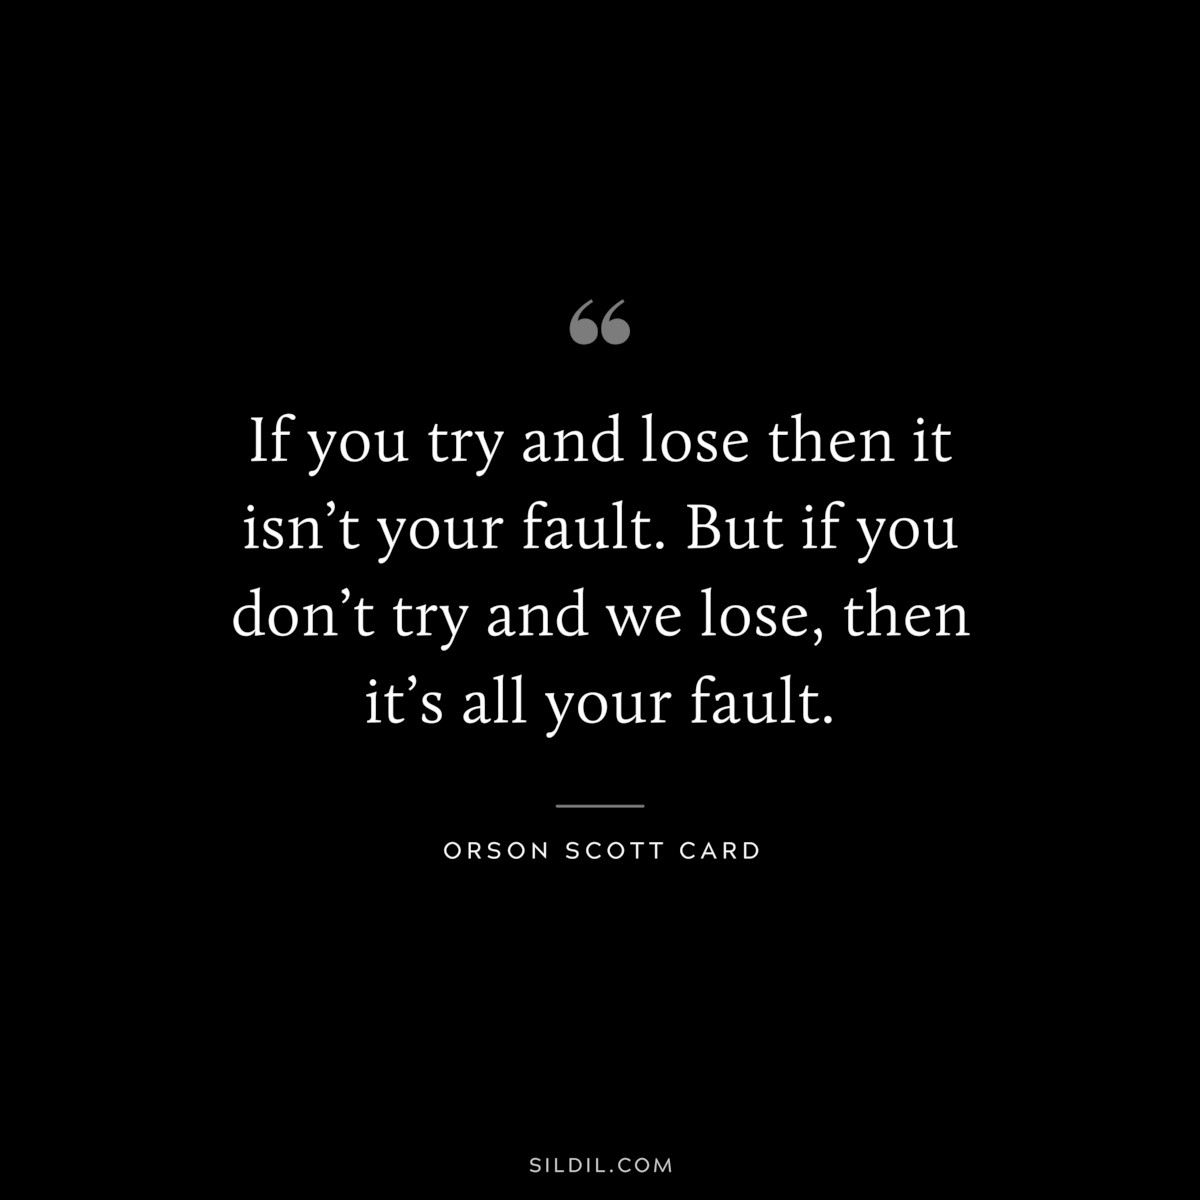 If you try and lose then it isn’t your fault. But if you don’t try and we lose, then it’s all your fault. ― Orson Scott Card